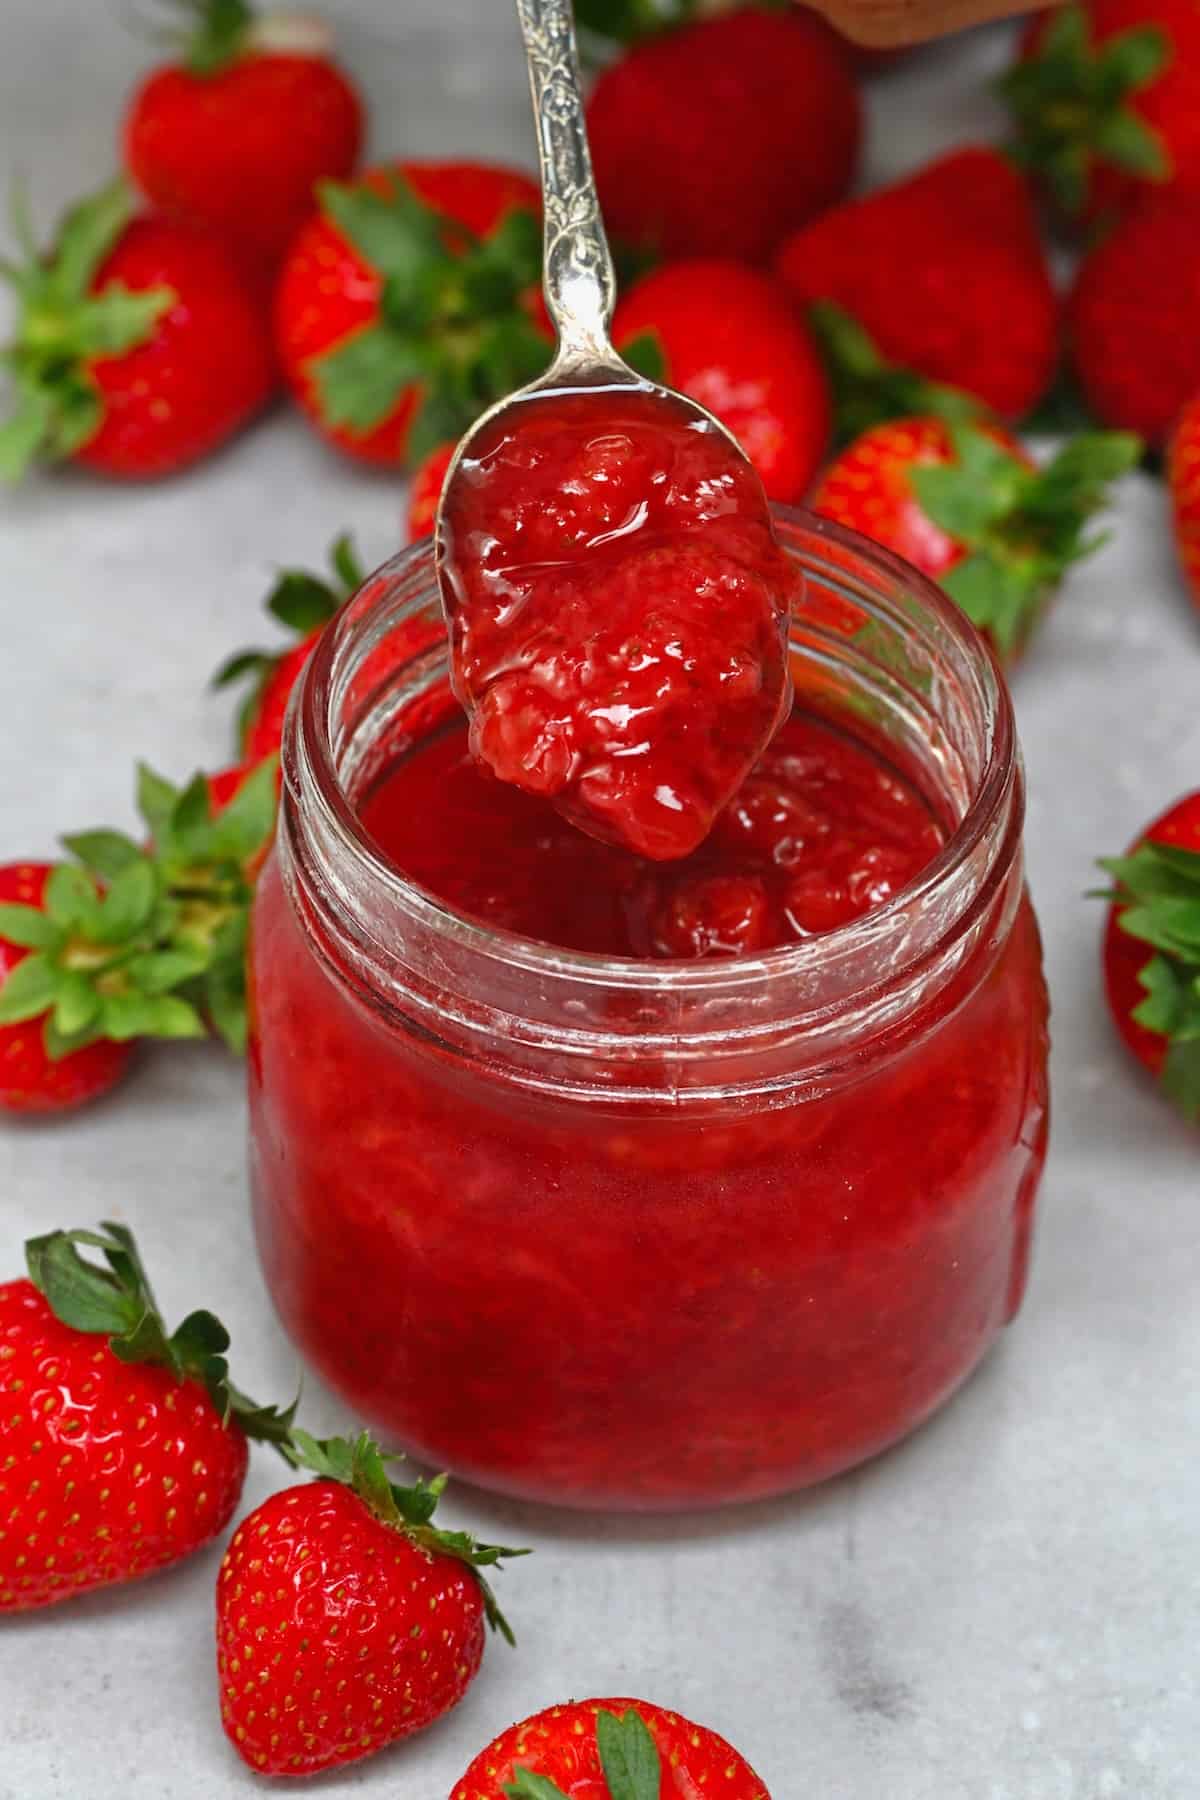 A spoonful of homemade strawberry jam